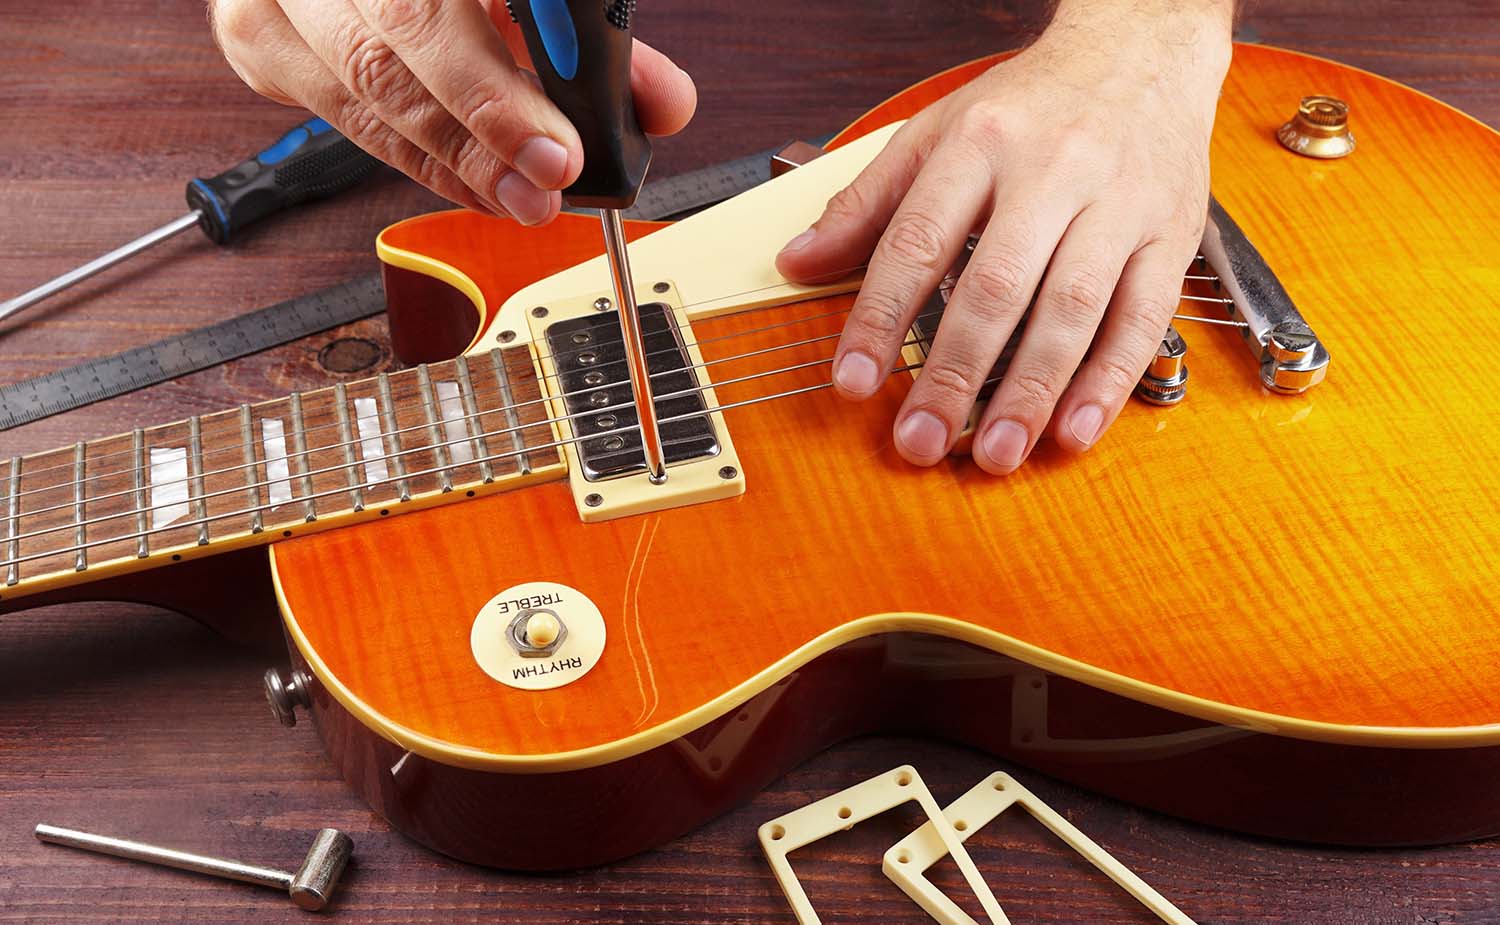 Updating your guitar